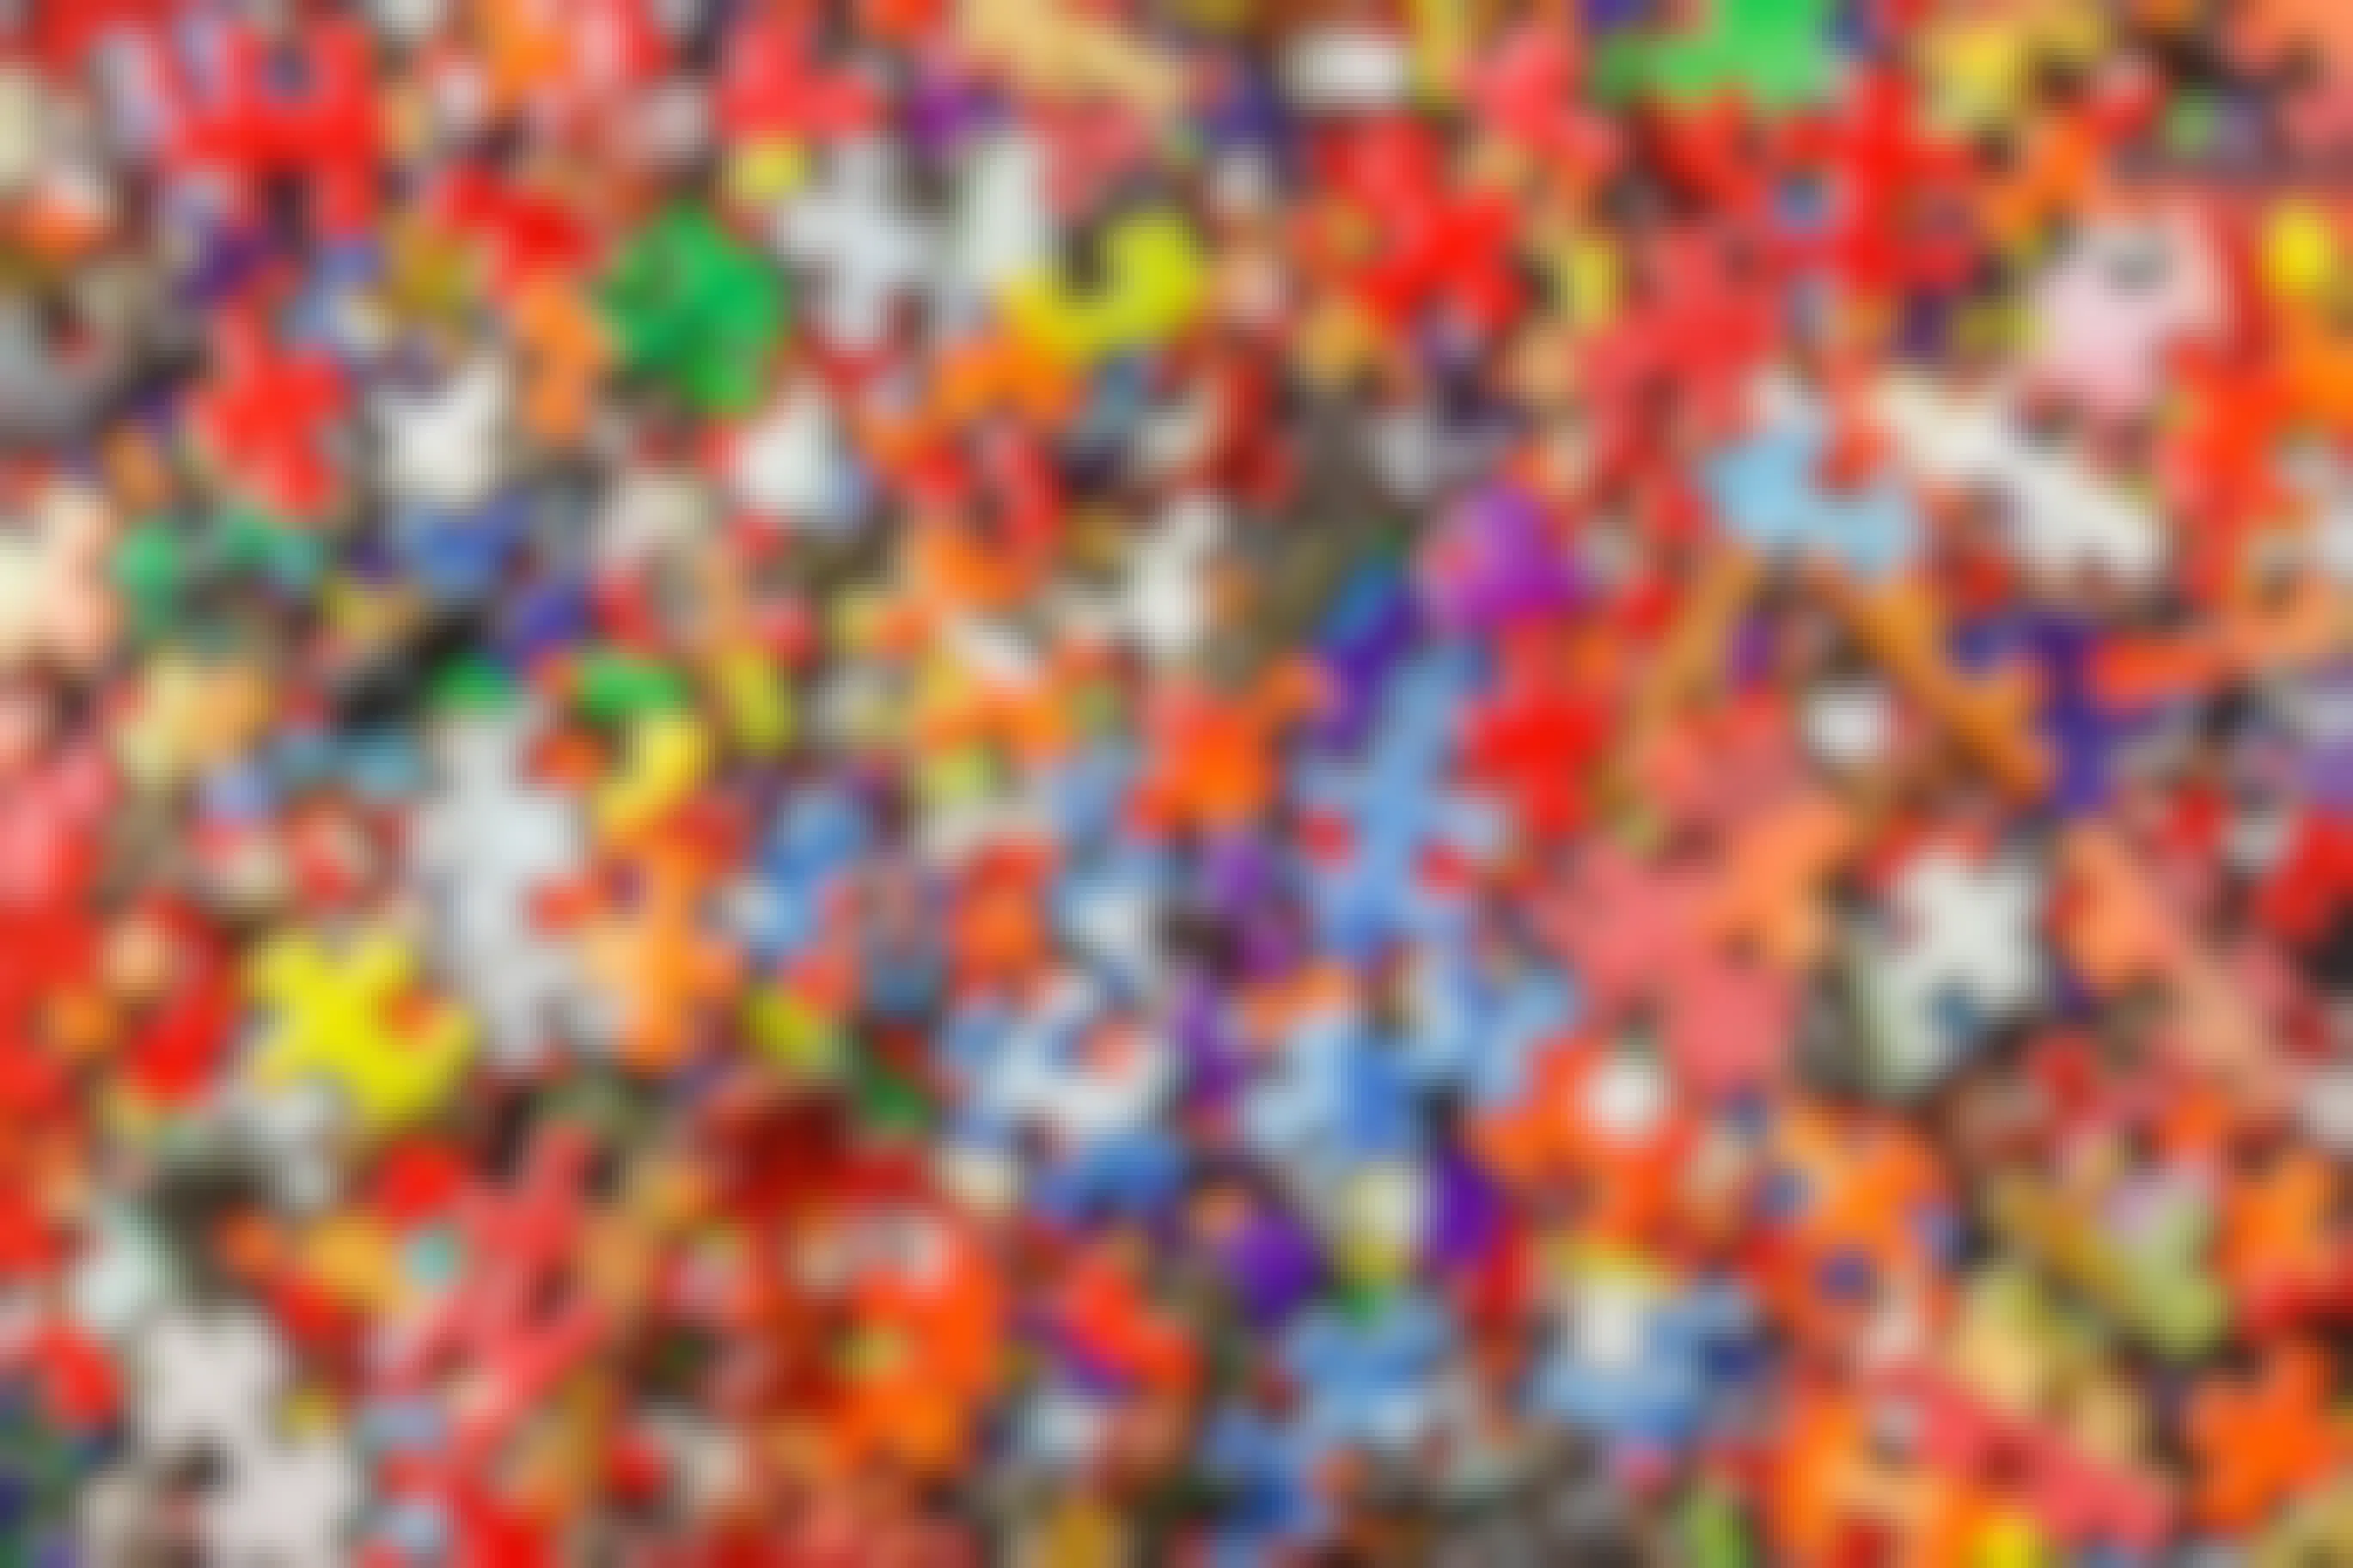 Large pile of bright, multicolored puzzle pieces.